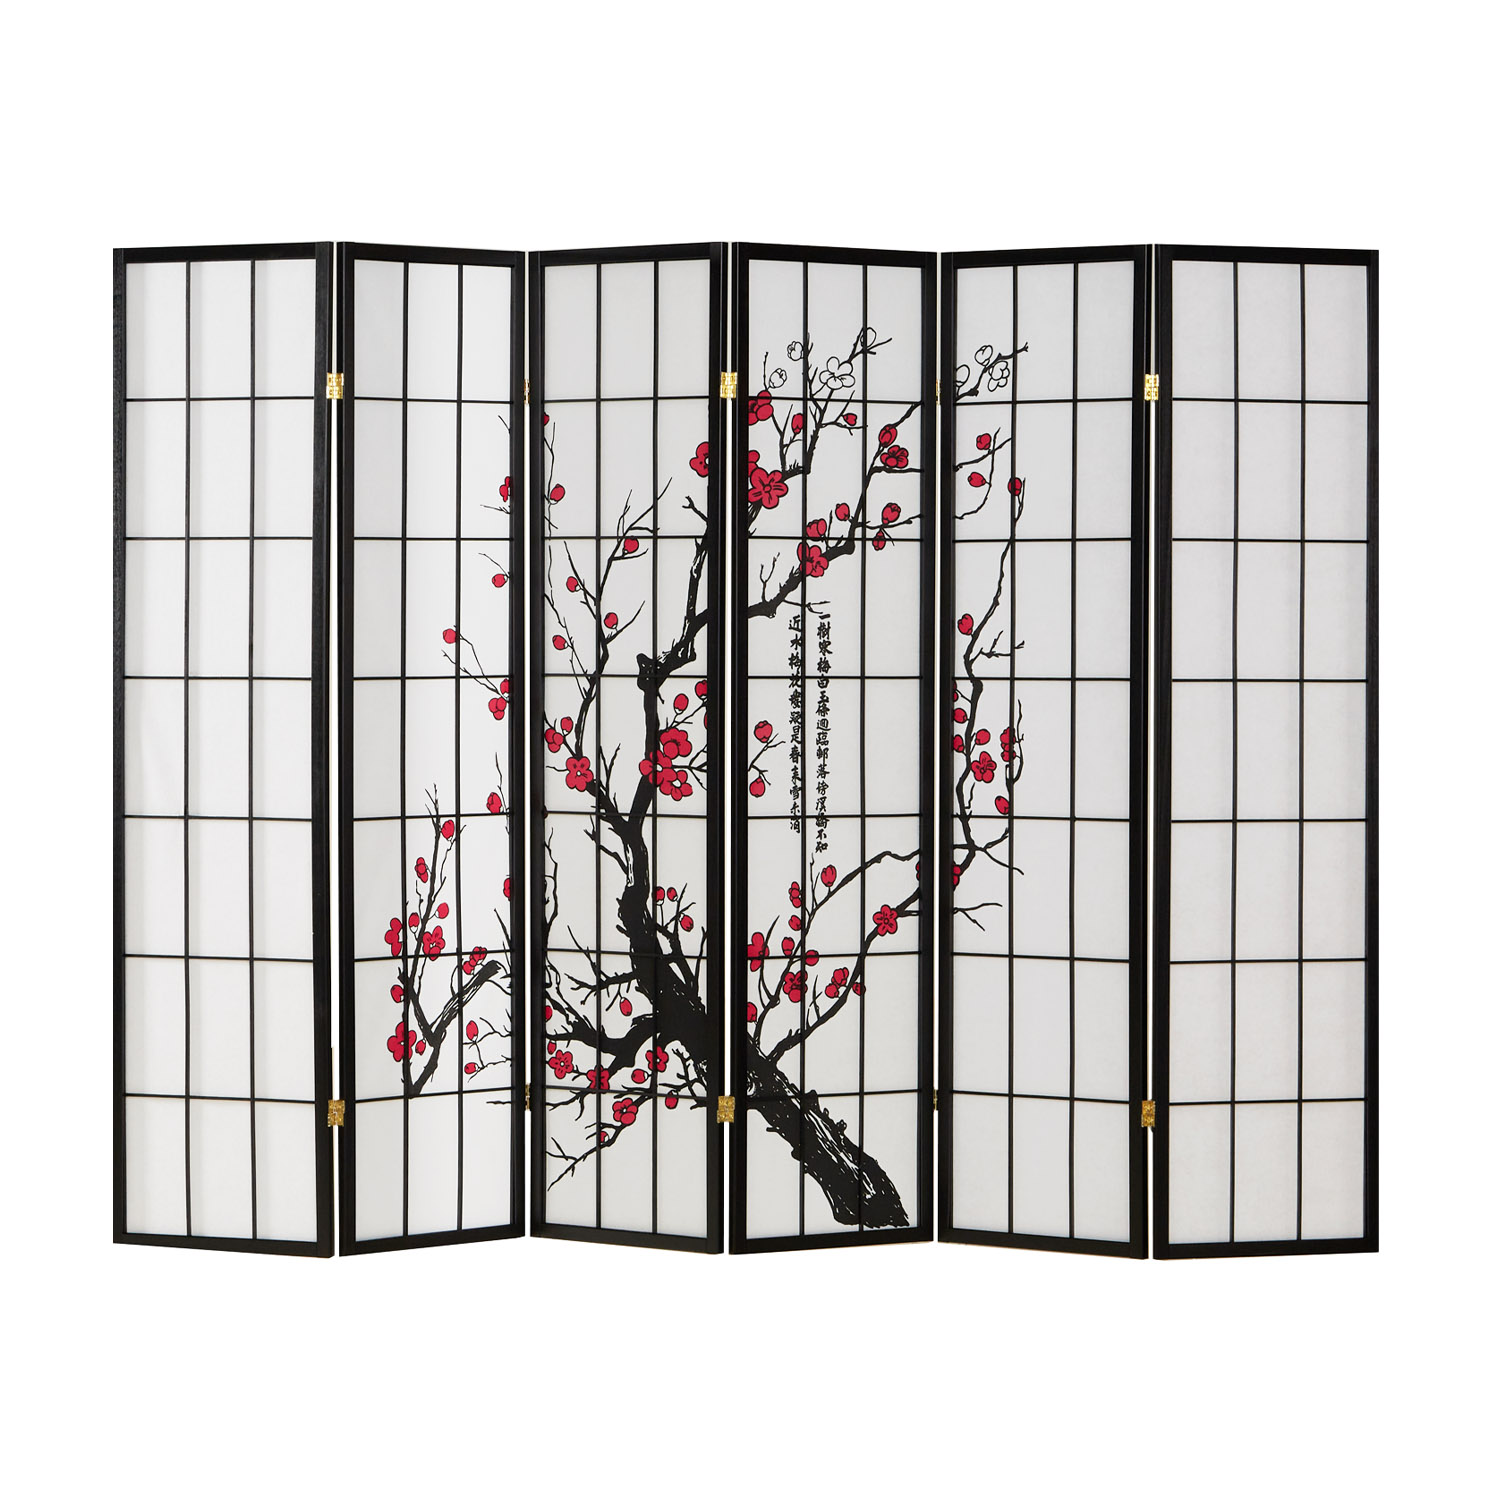 Screen room divider 6 parts wood black, rice paper white cherry pattern